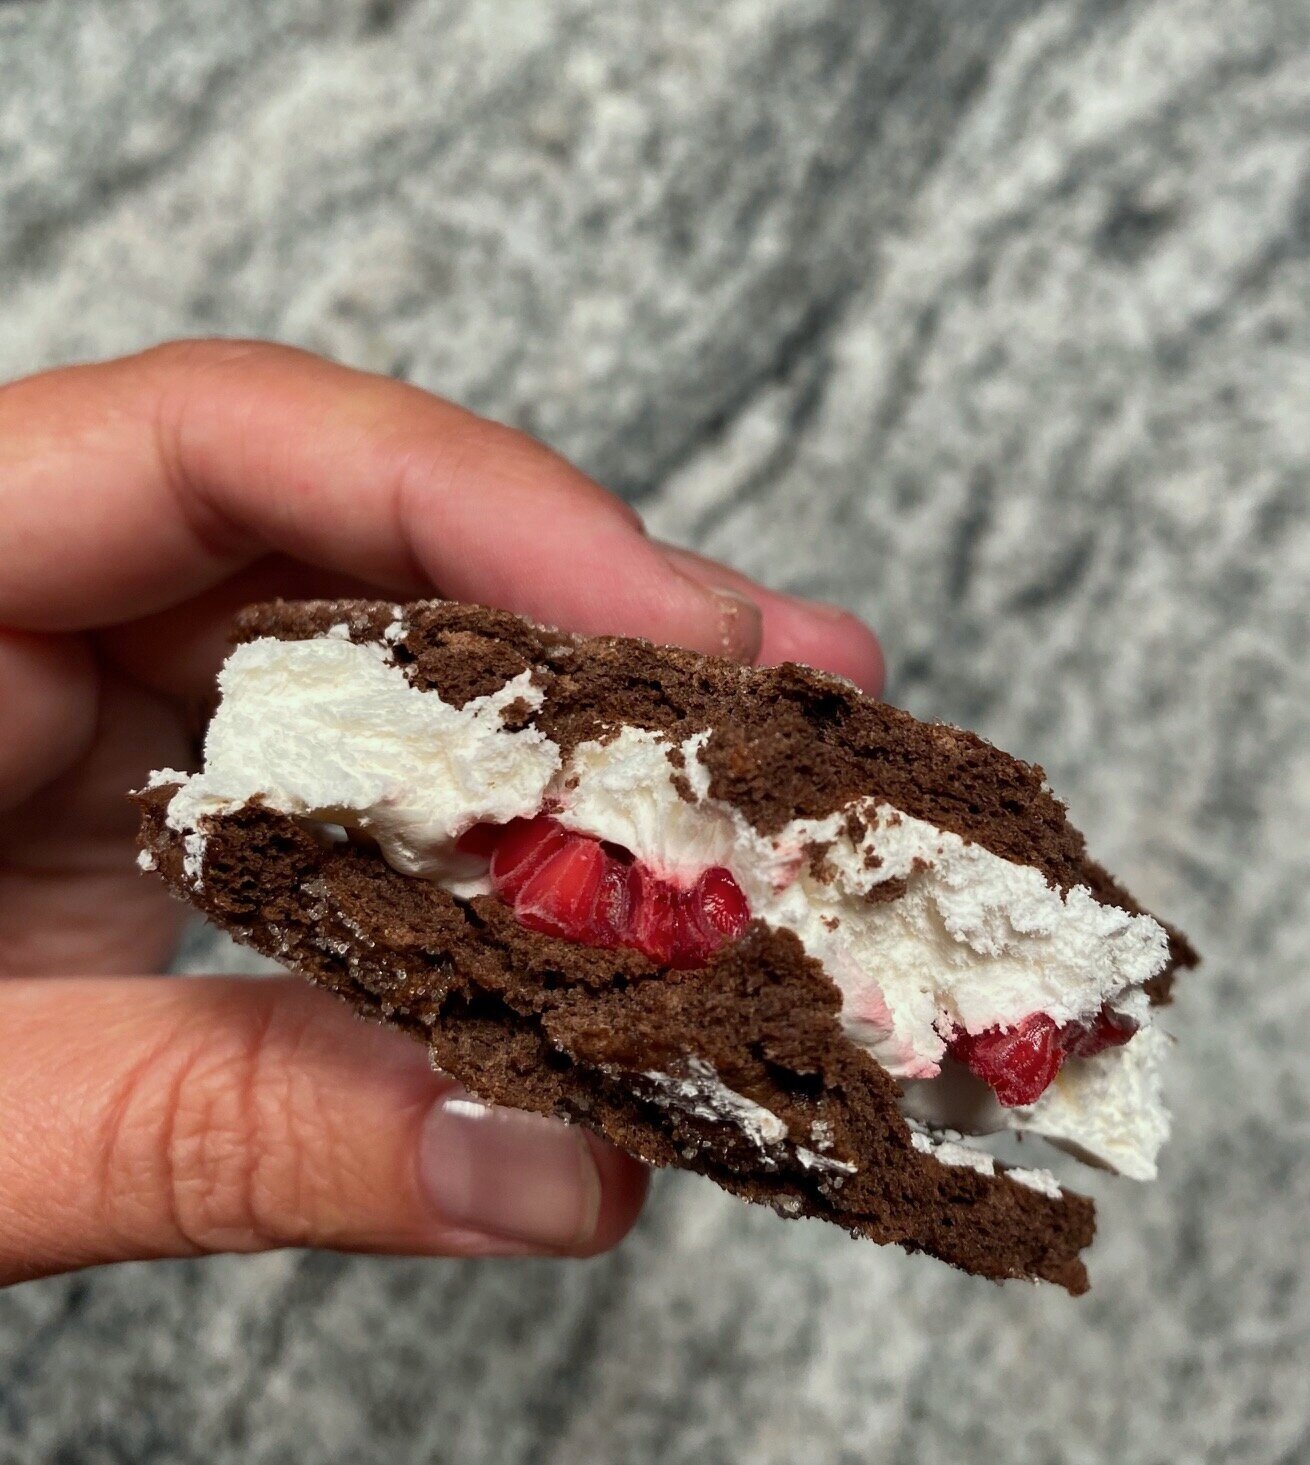 DIY "Ice Cream" Sandwich, about $7 for ingredients 